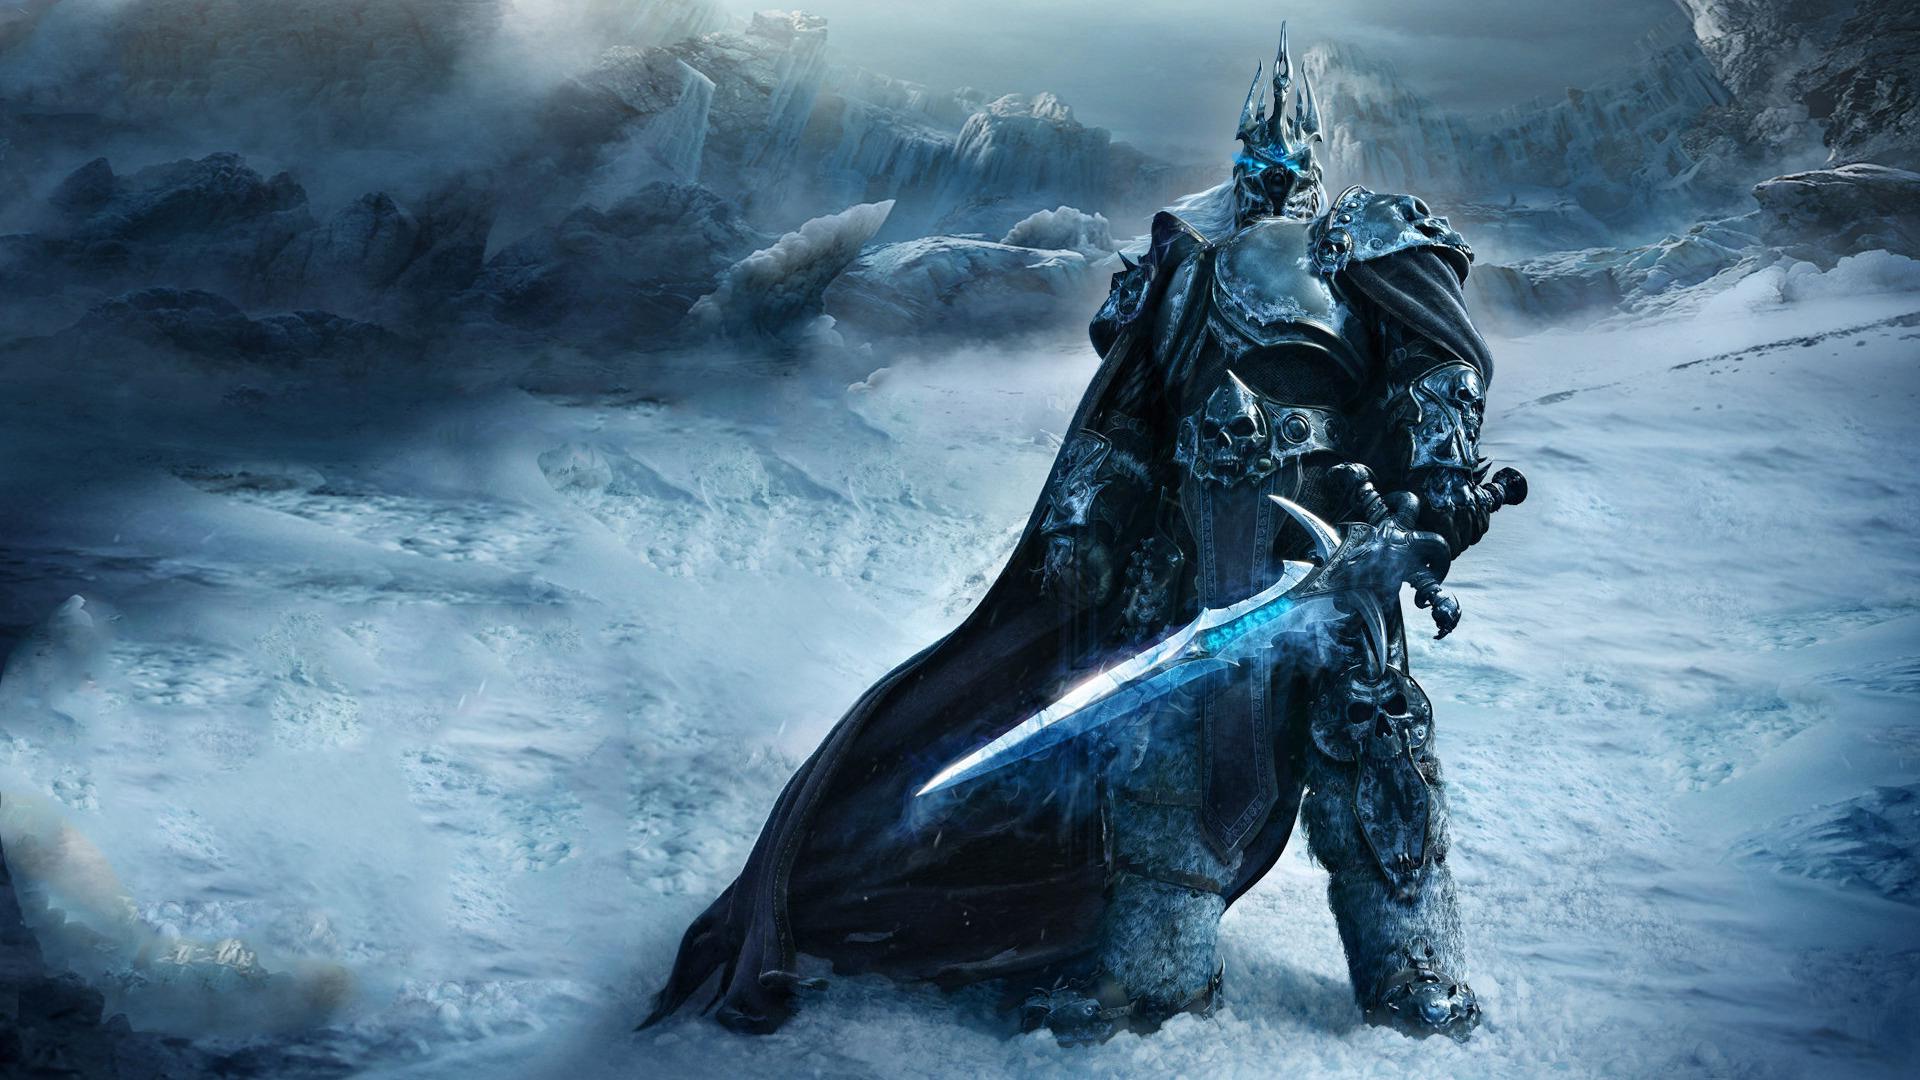 World Of Warcraft: Wrath Of The Lich King, World Of Warcraft, Video Games, Arthas, Lich King Wallpaper